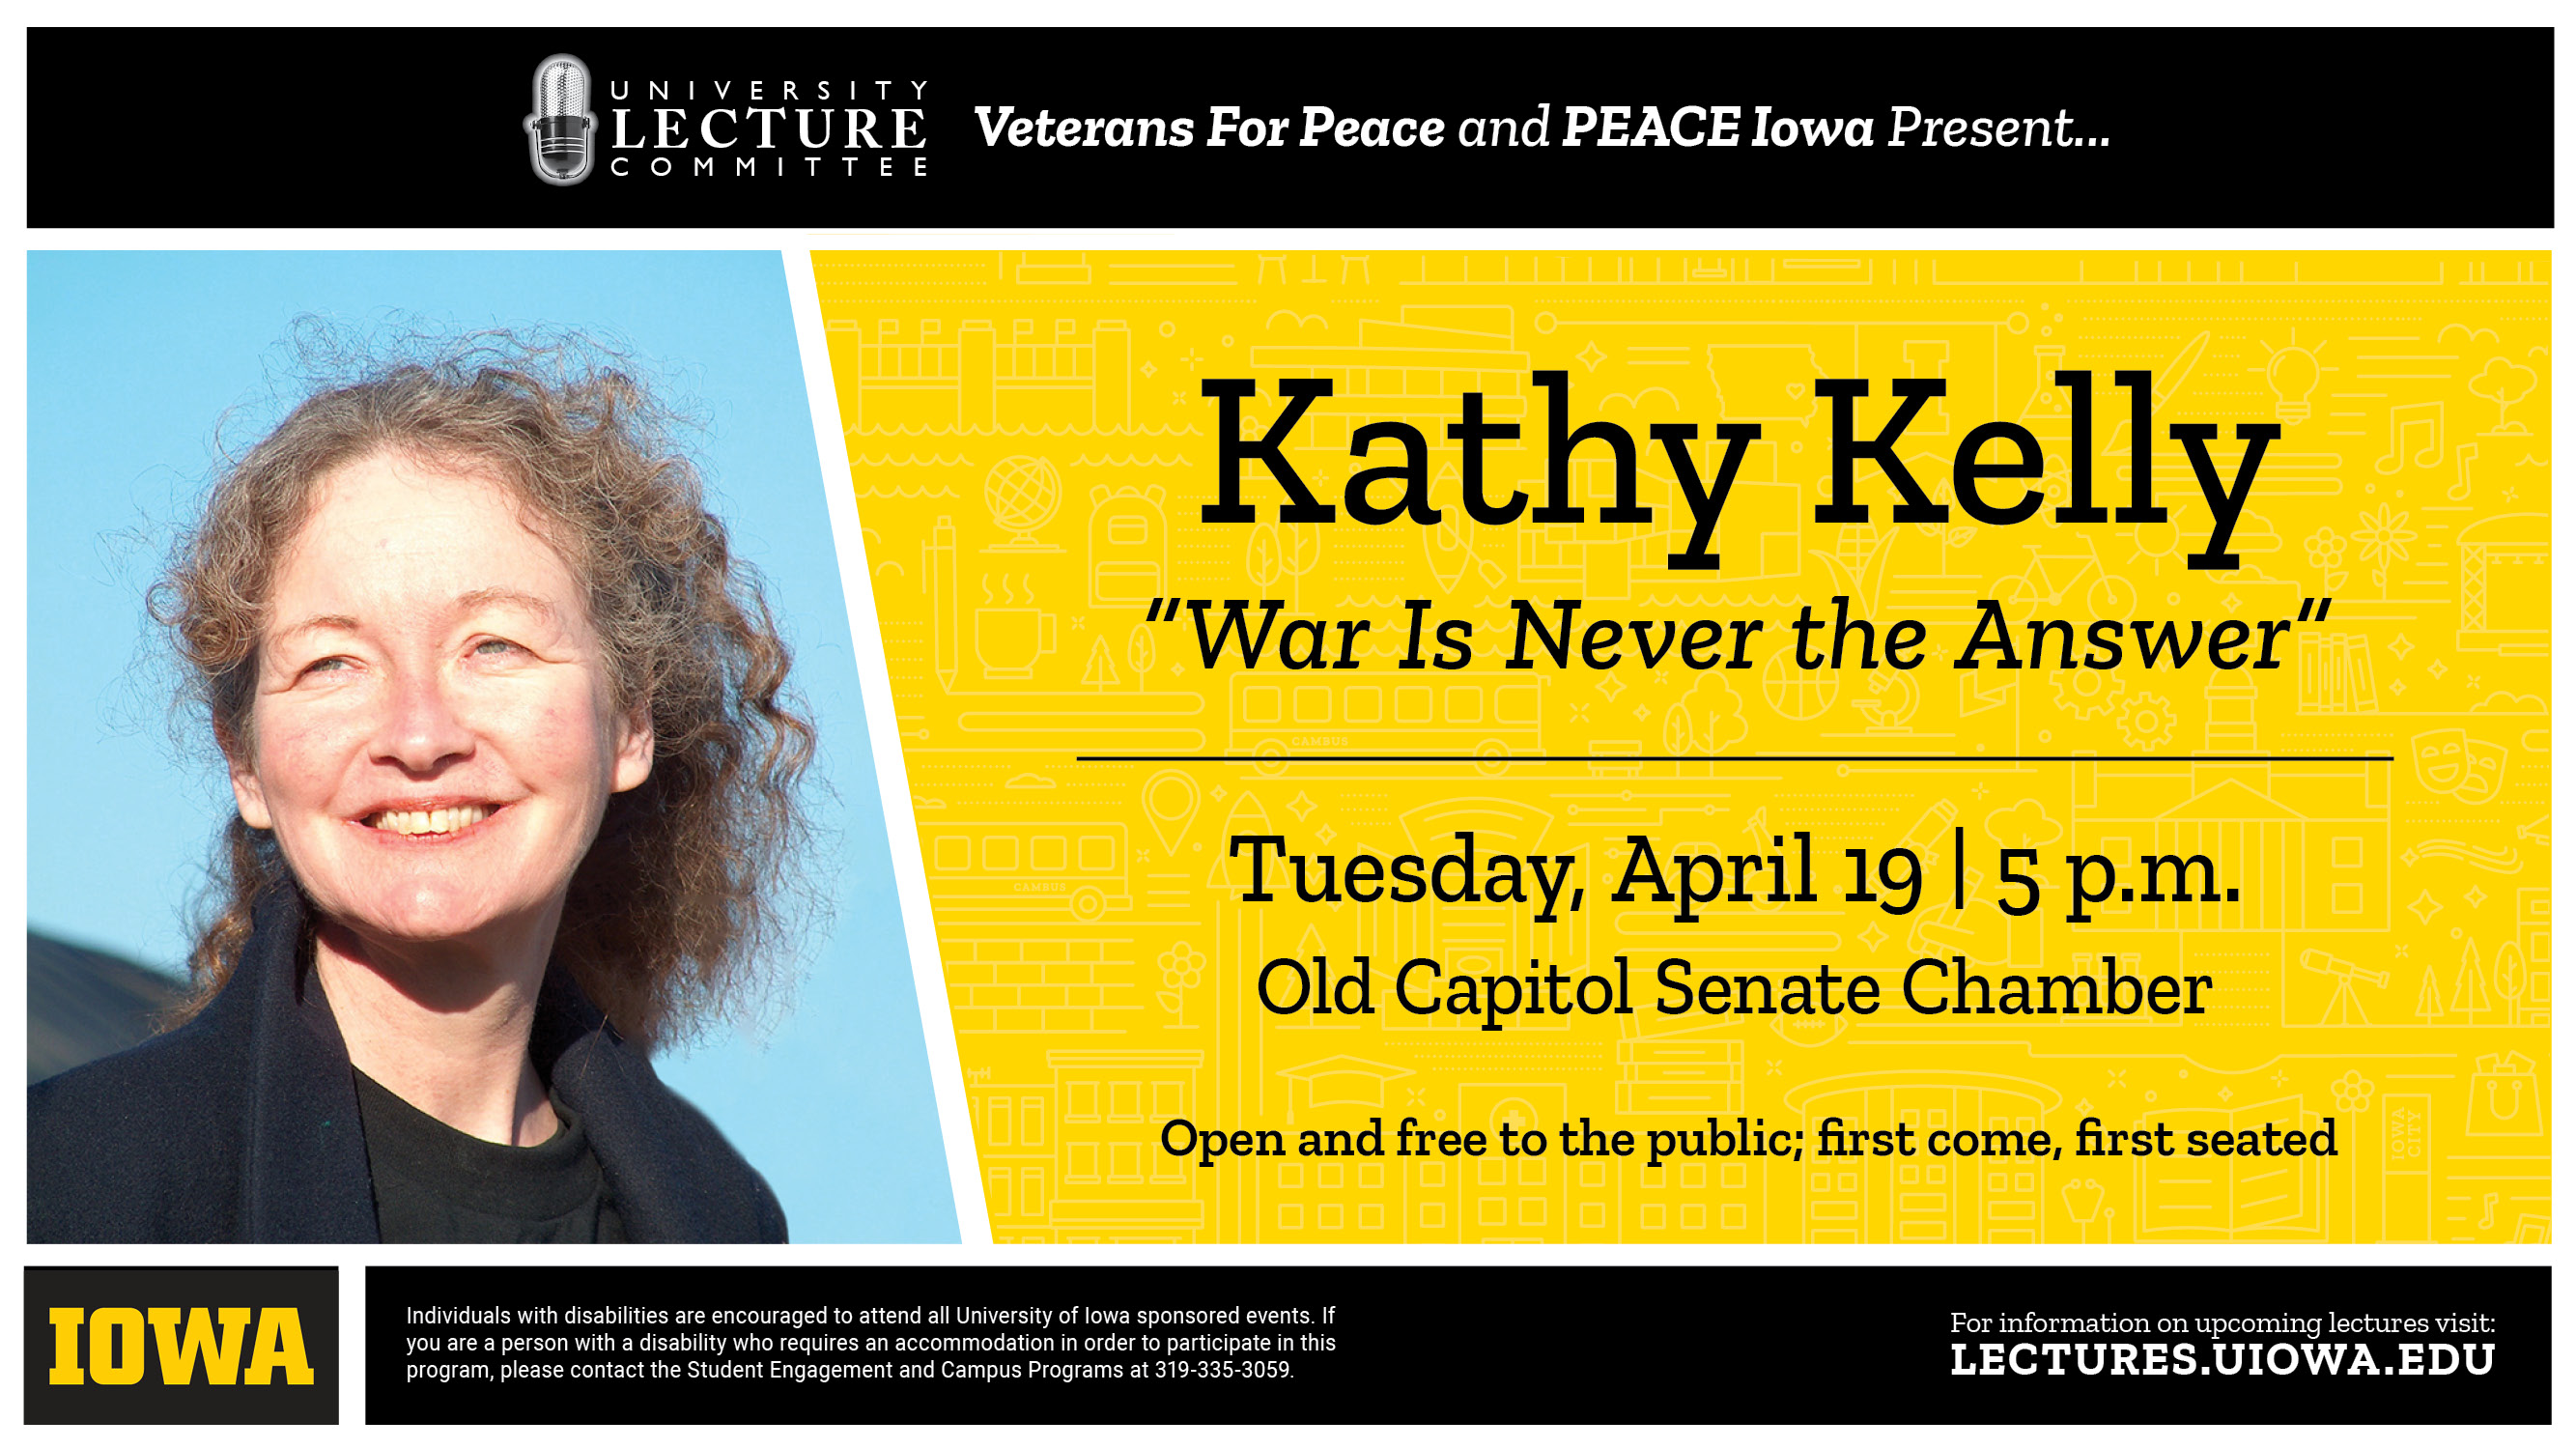 University Lecture Committee, Veterans For Peace and PEACE Iowa Present... Kathy Kelly, "War Is Never the Answer", Tuesday, April 19, 5 p.m. Old Capital Senate Chamber; For more information, visit lectures.uiowa.edu